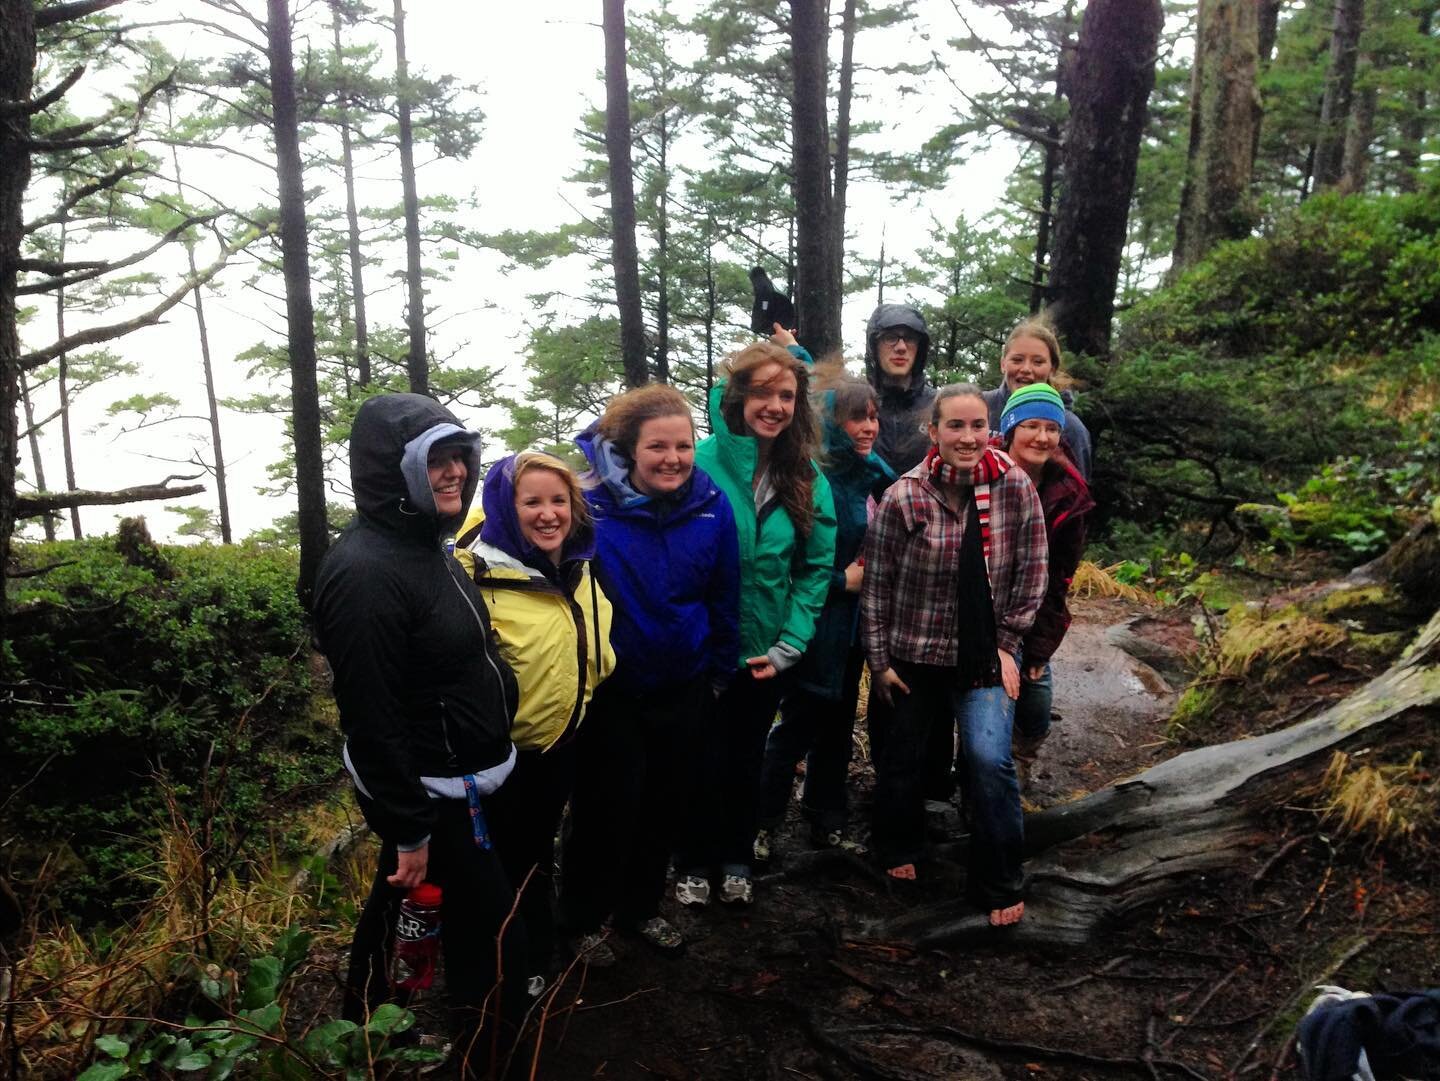 Thankful Thursday! Did you know there are over 25 hiking trails in or just outside of Cannon Beach? We are thankful to be surrounded by so much beauty to explore! (even on the windy days)
(Photo from the 2012-13 school year)